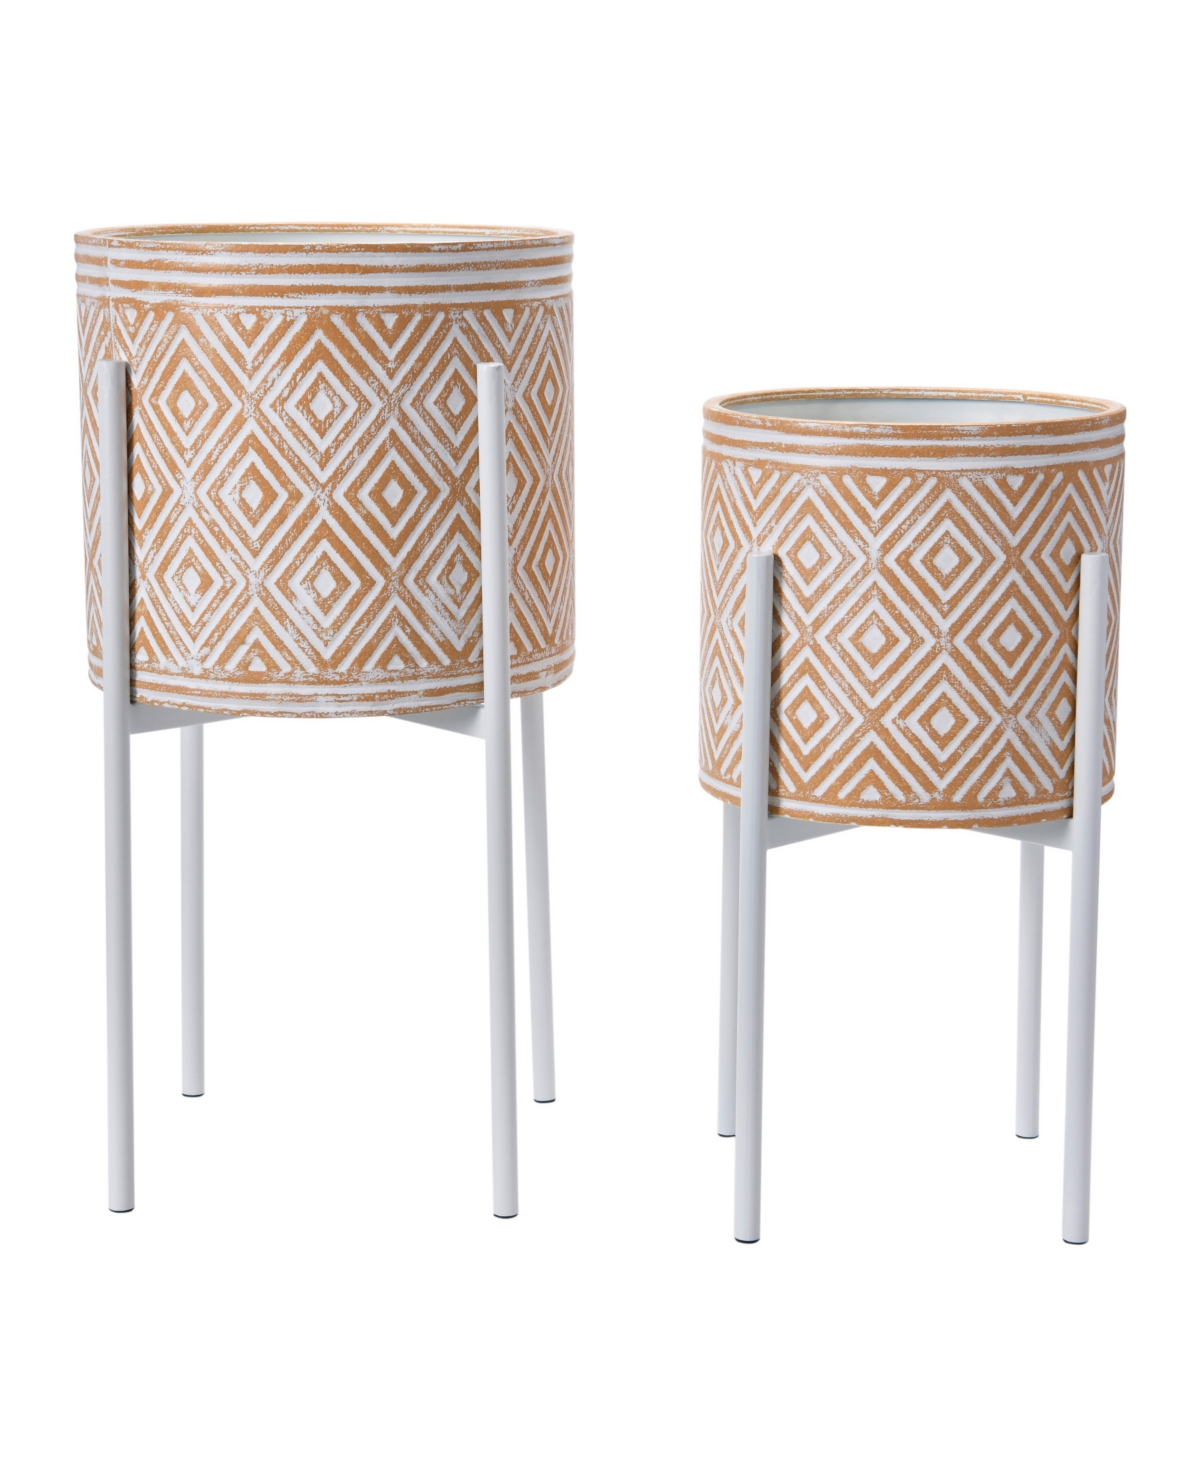 Modern Boho Embossed Metal Planters with Stands - Terracotta